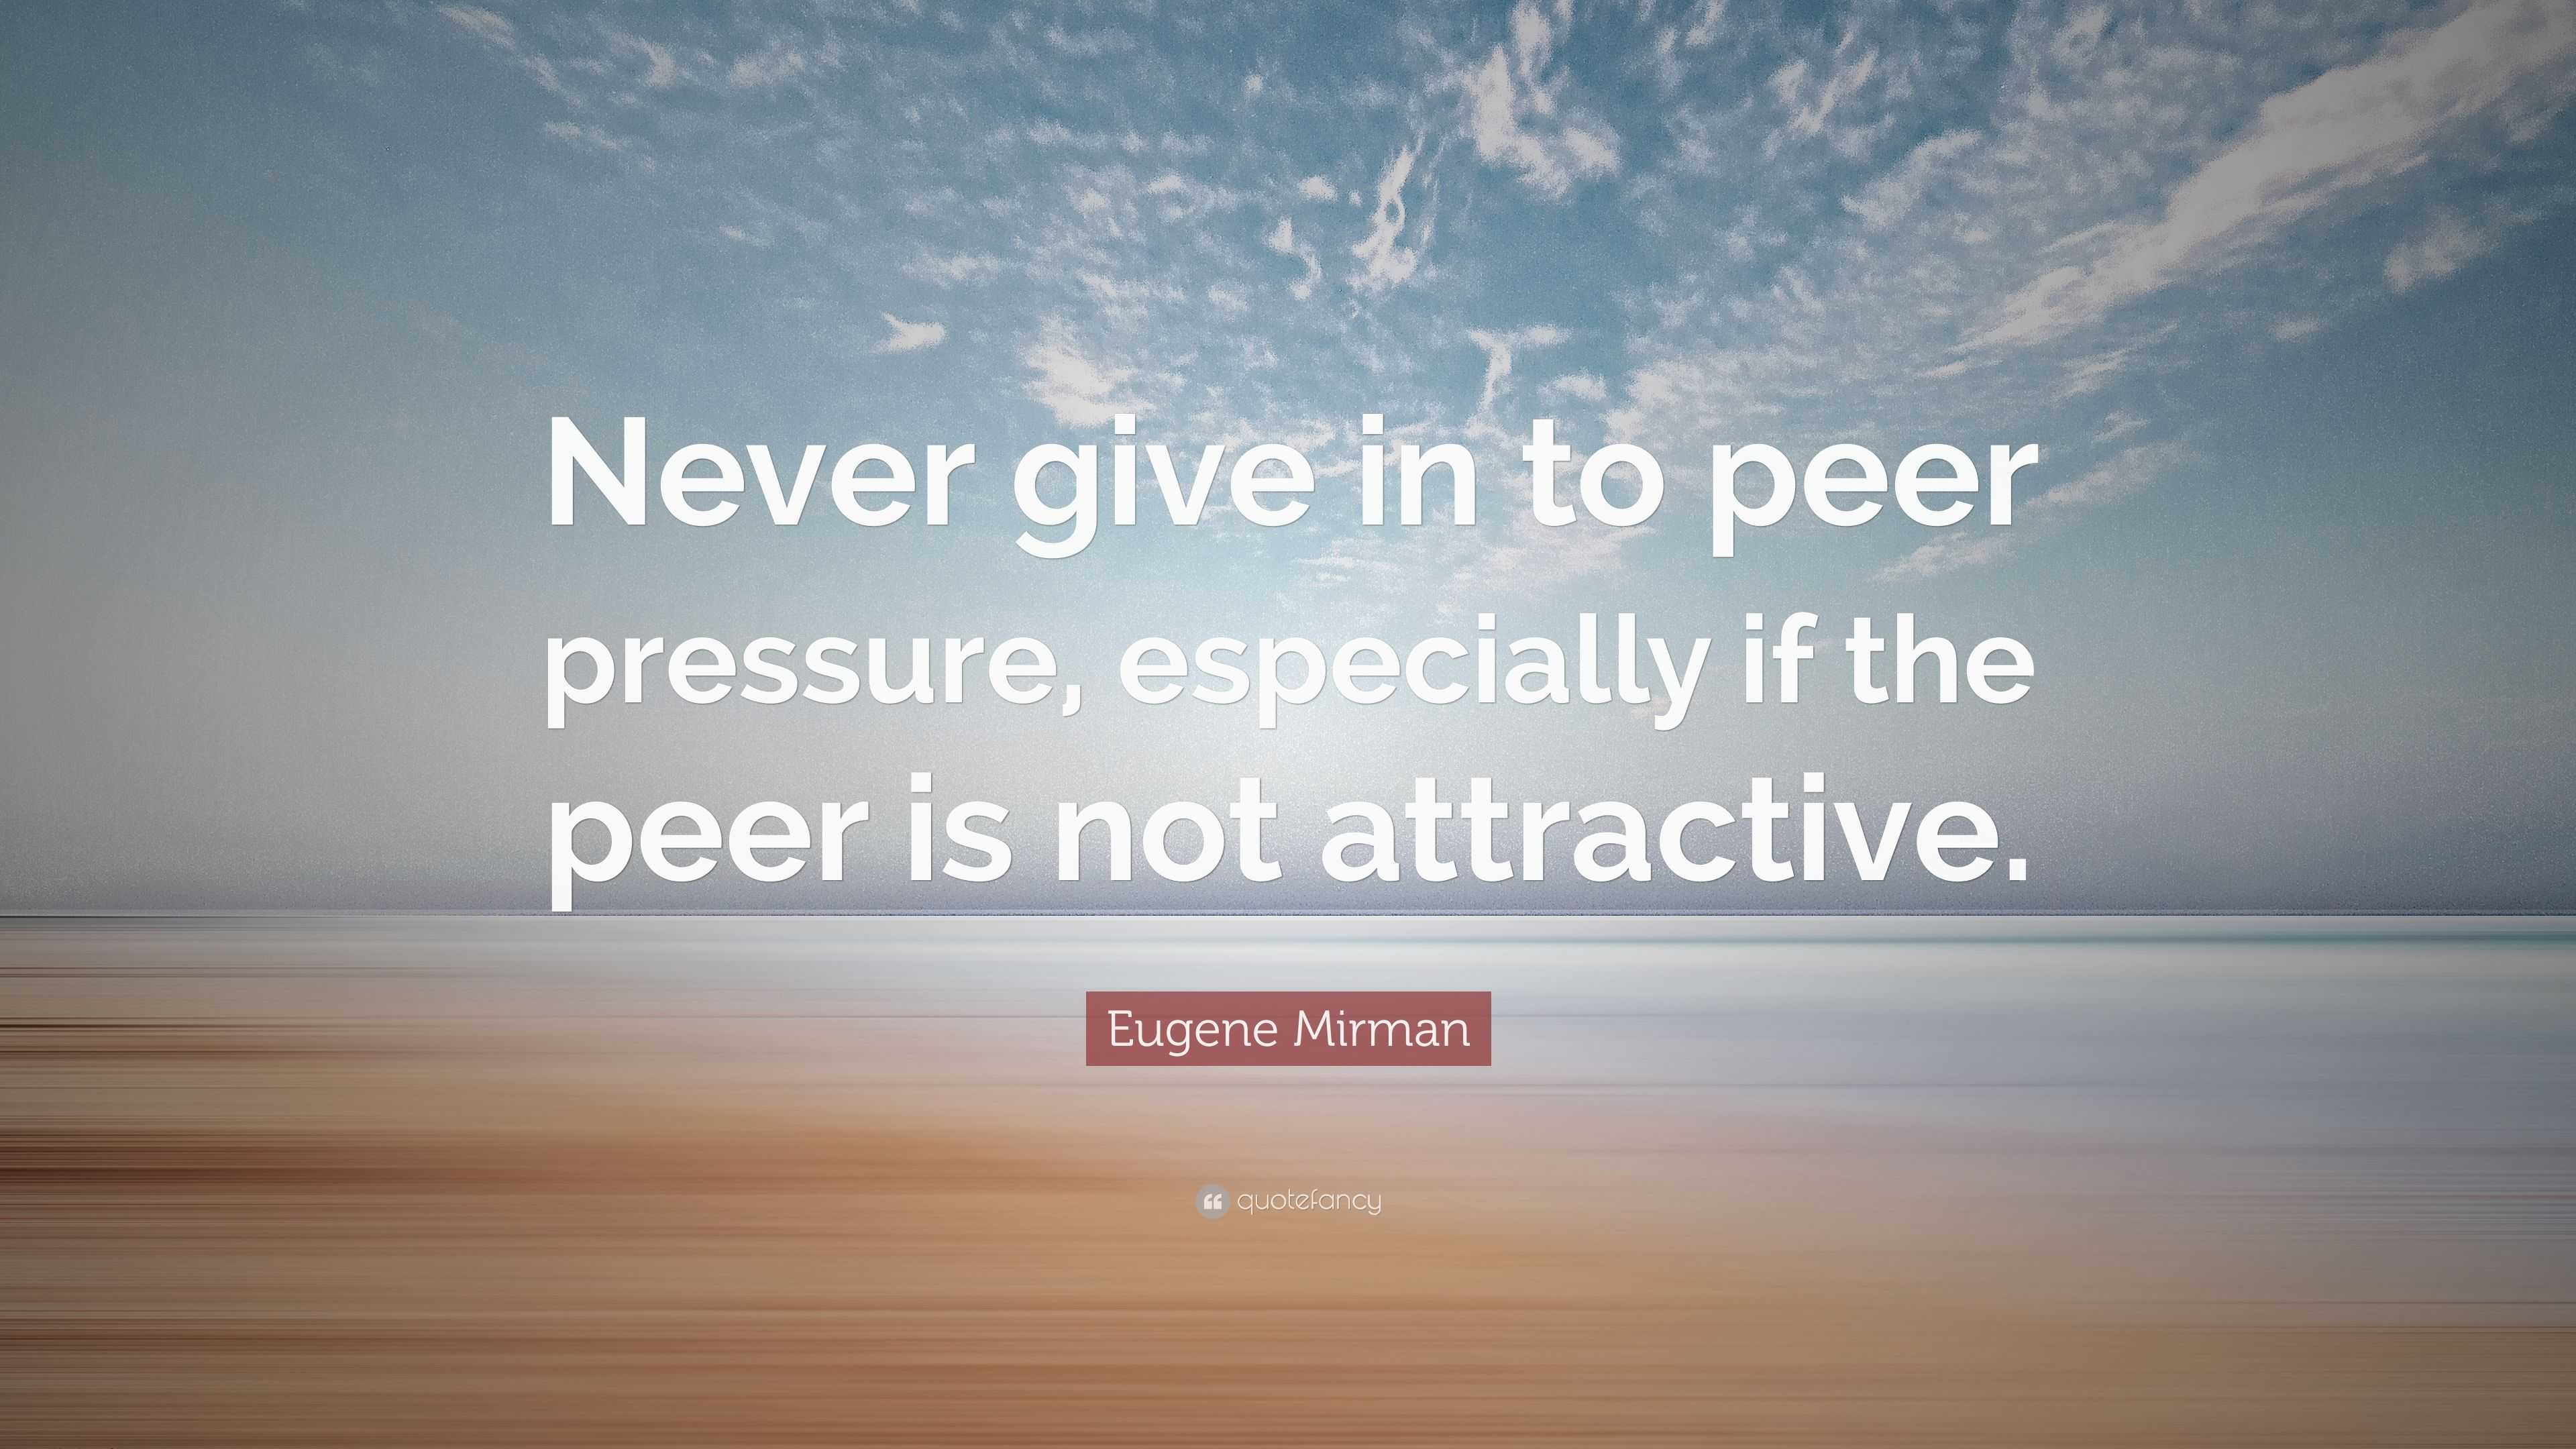 Eugene Mirman Quote: "Never give in to peer pressure, especially if the peer is not attractive ...